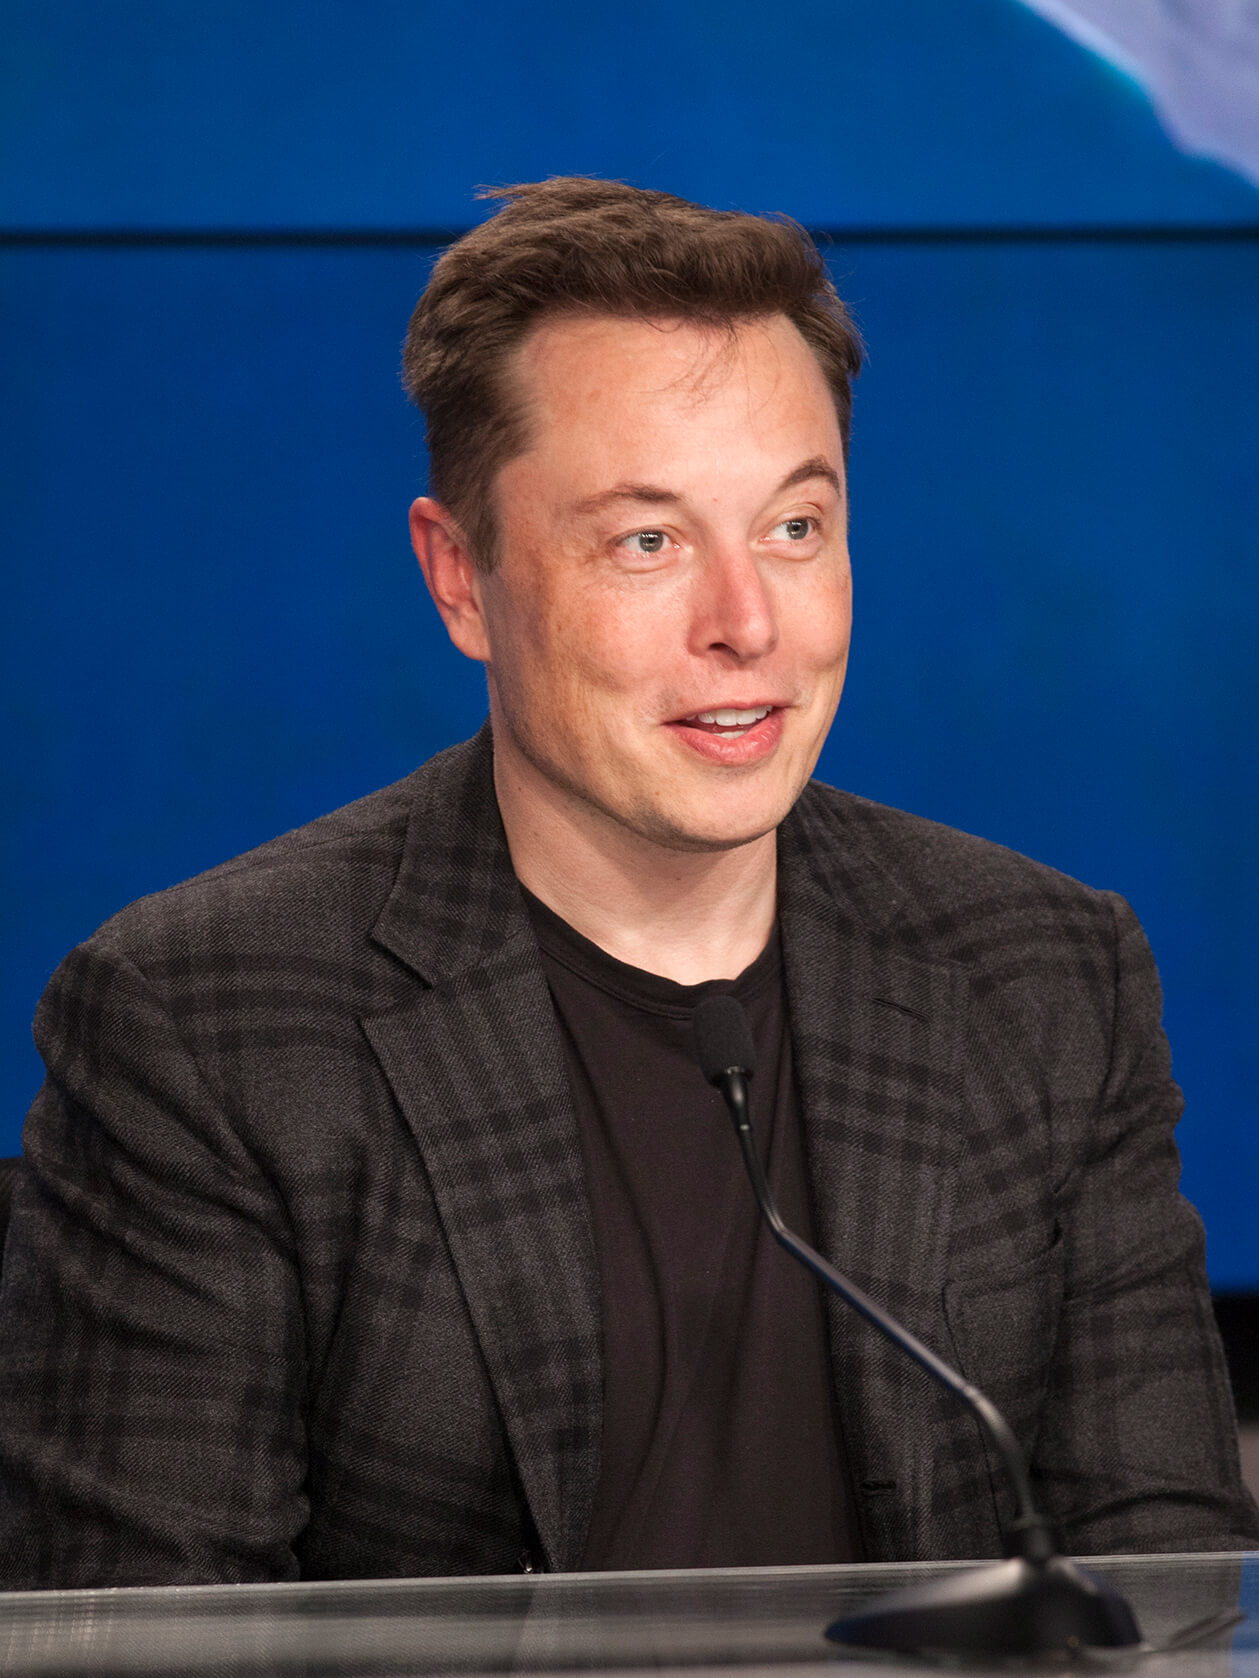 Musk during a SpaceX press conference